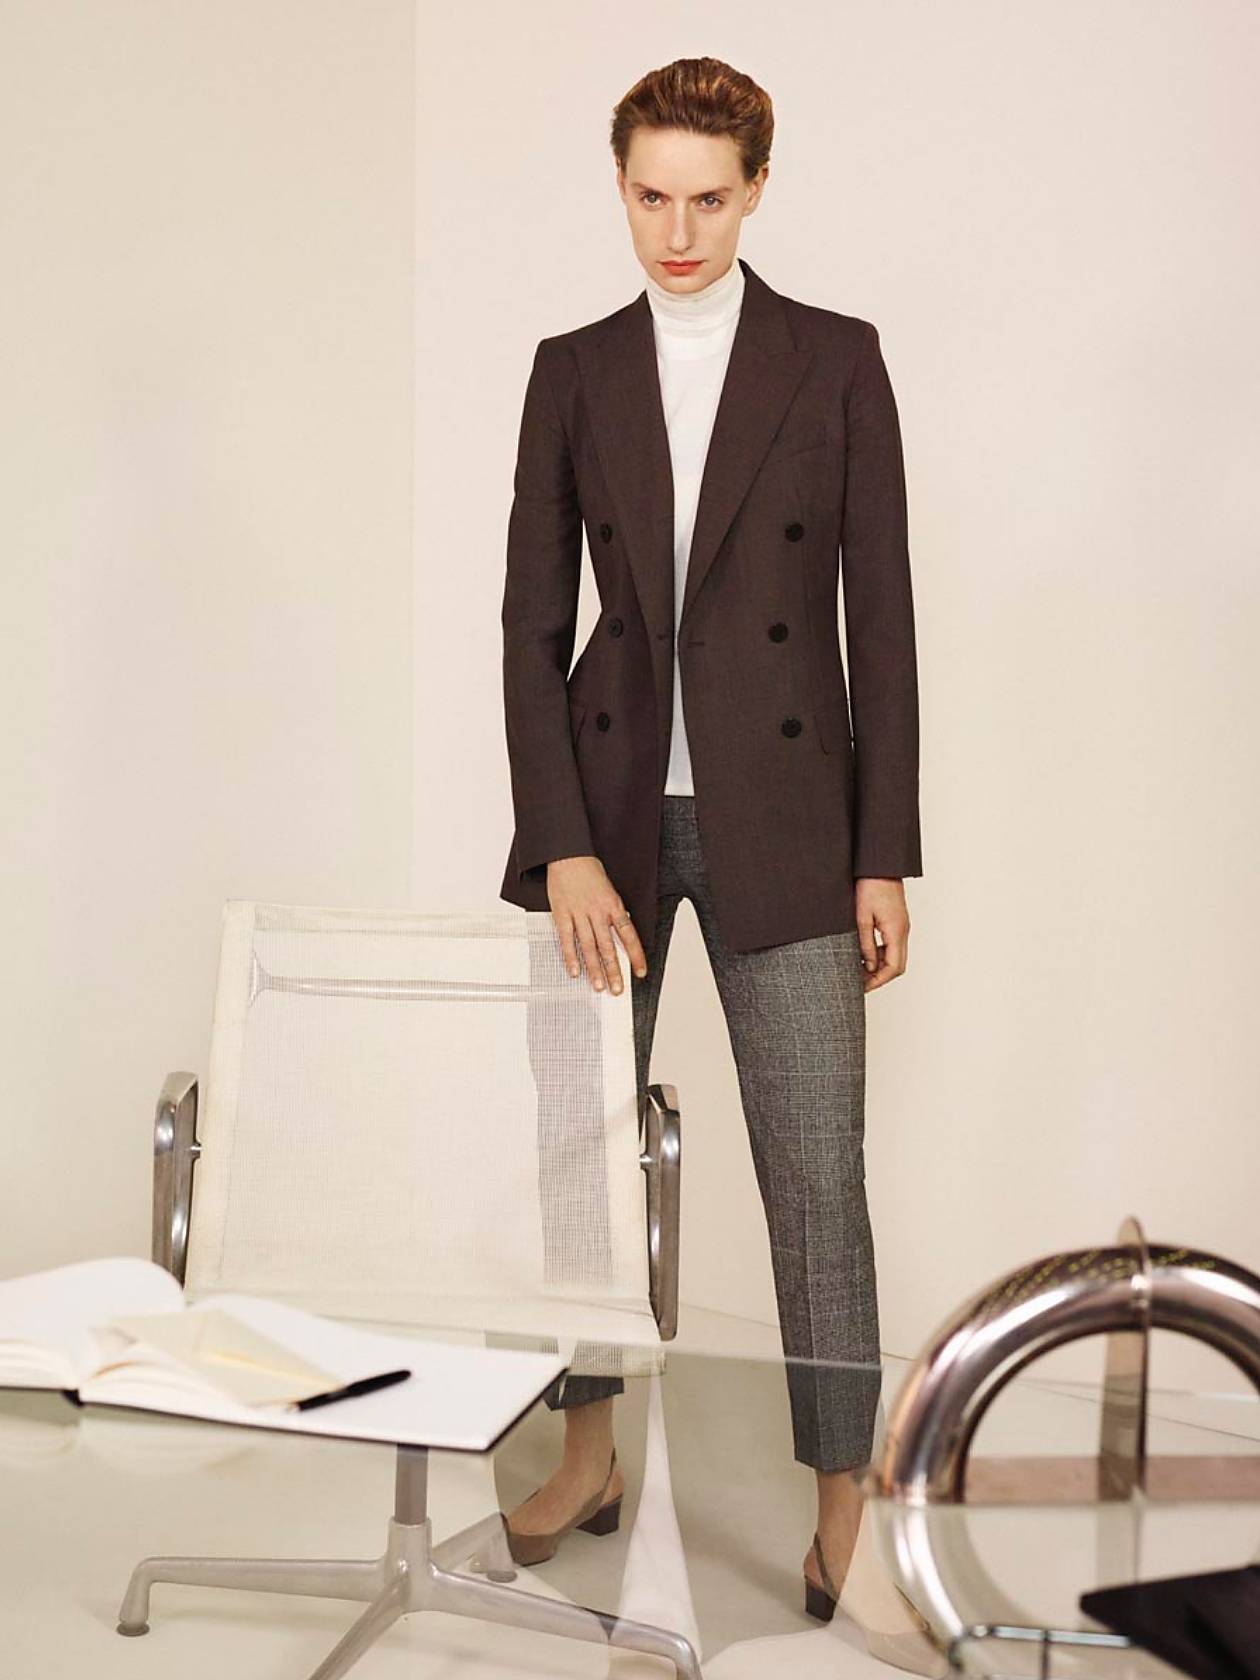 Shop the Look: DB TAILOR JKT